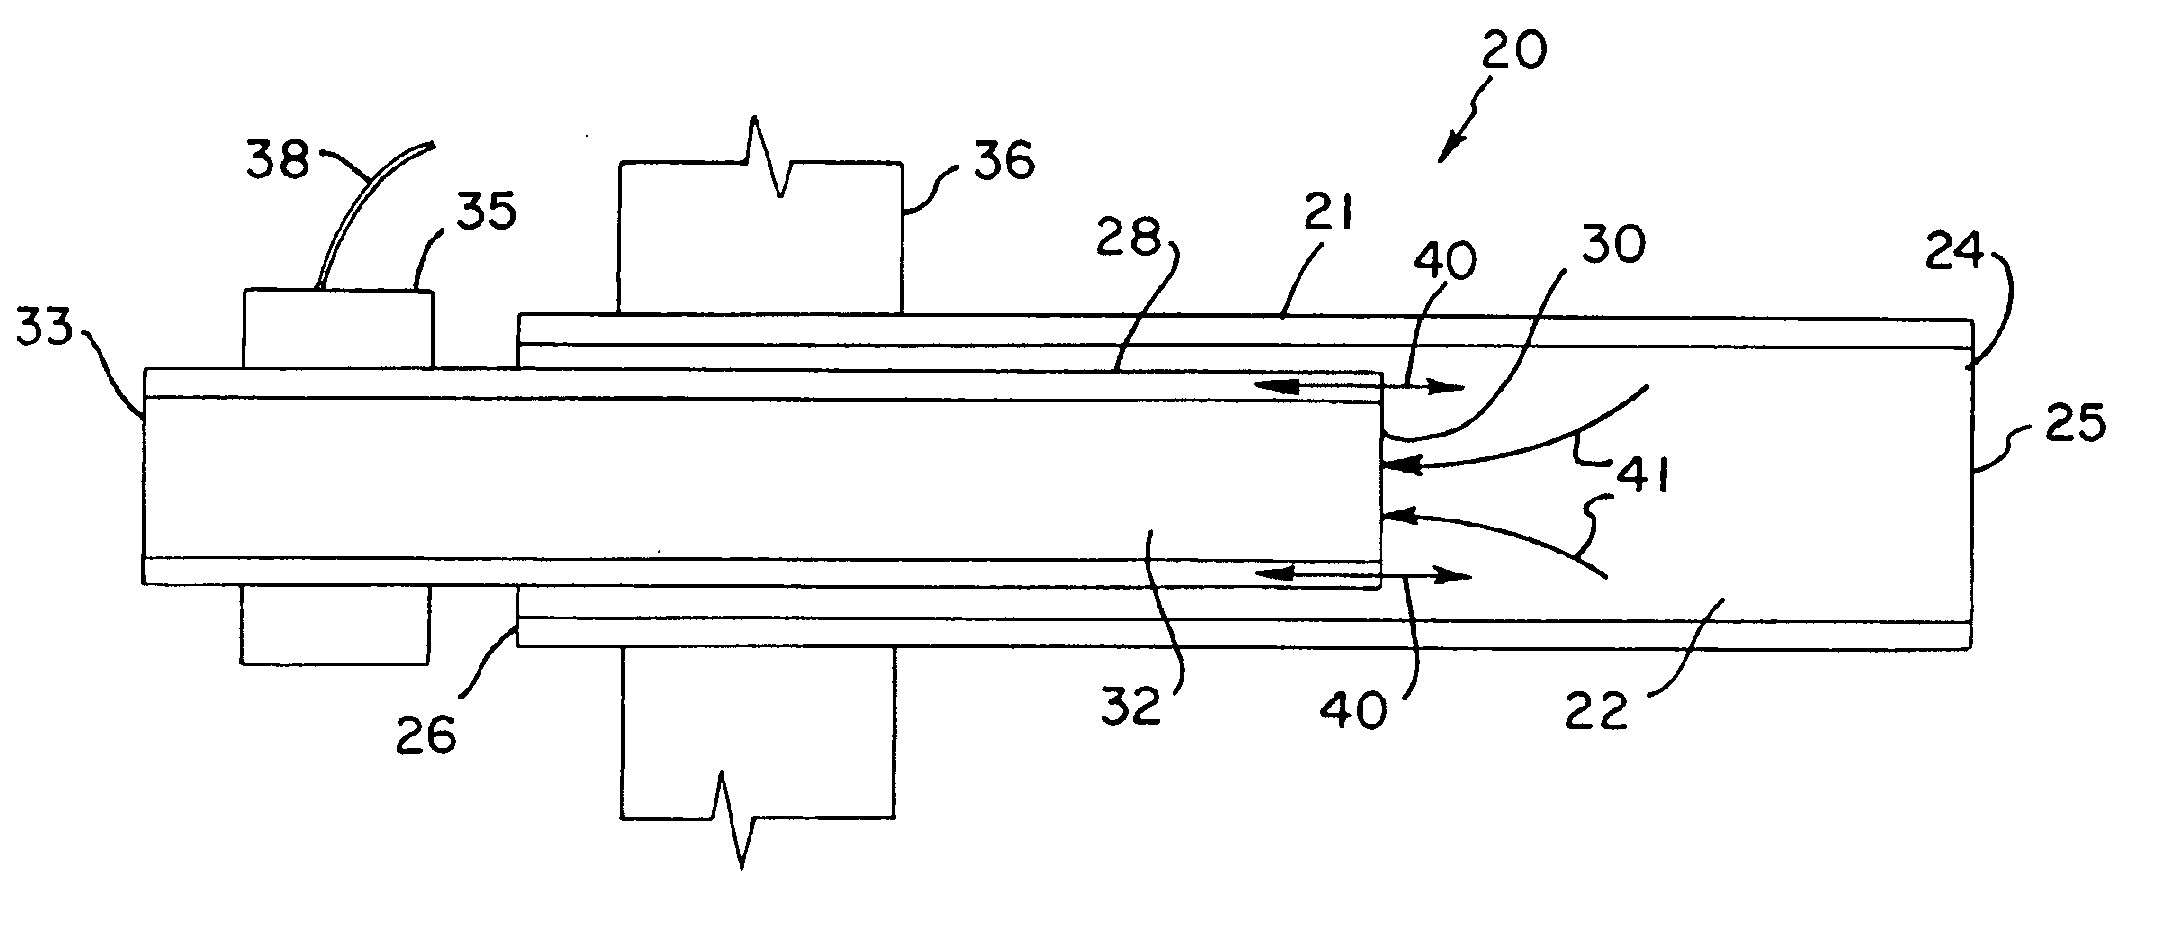 Ultrasonically actuated needle pump system